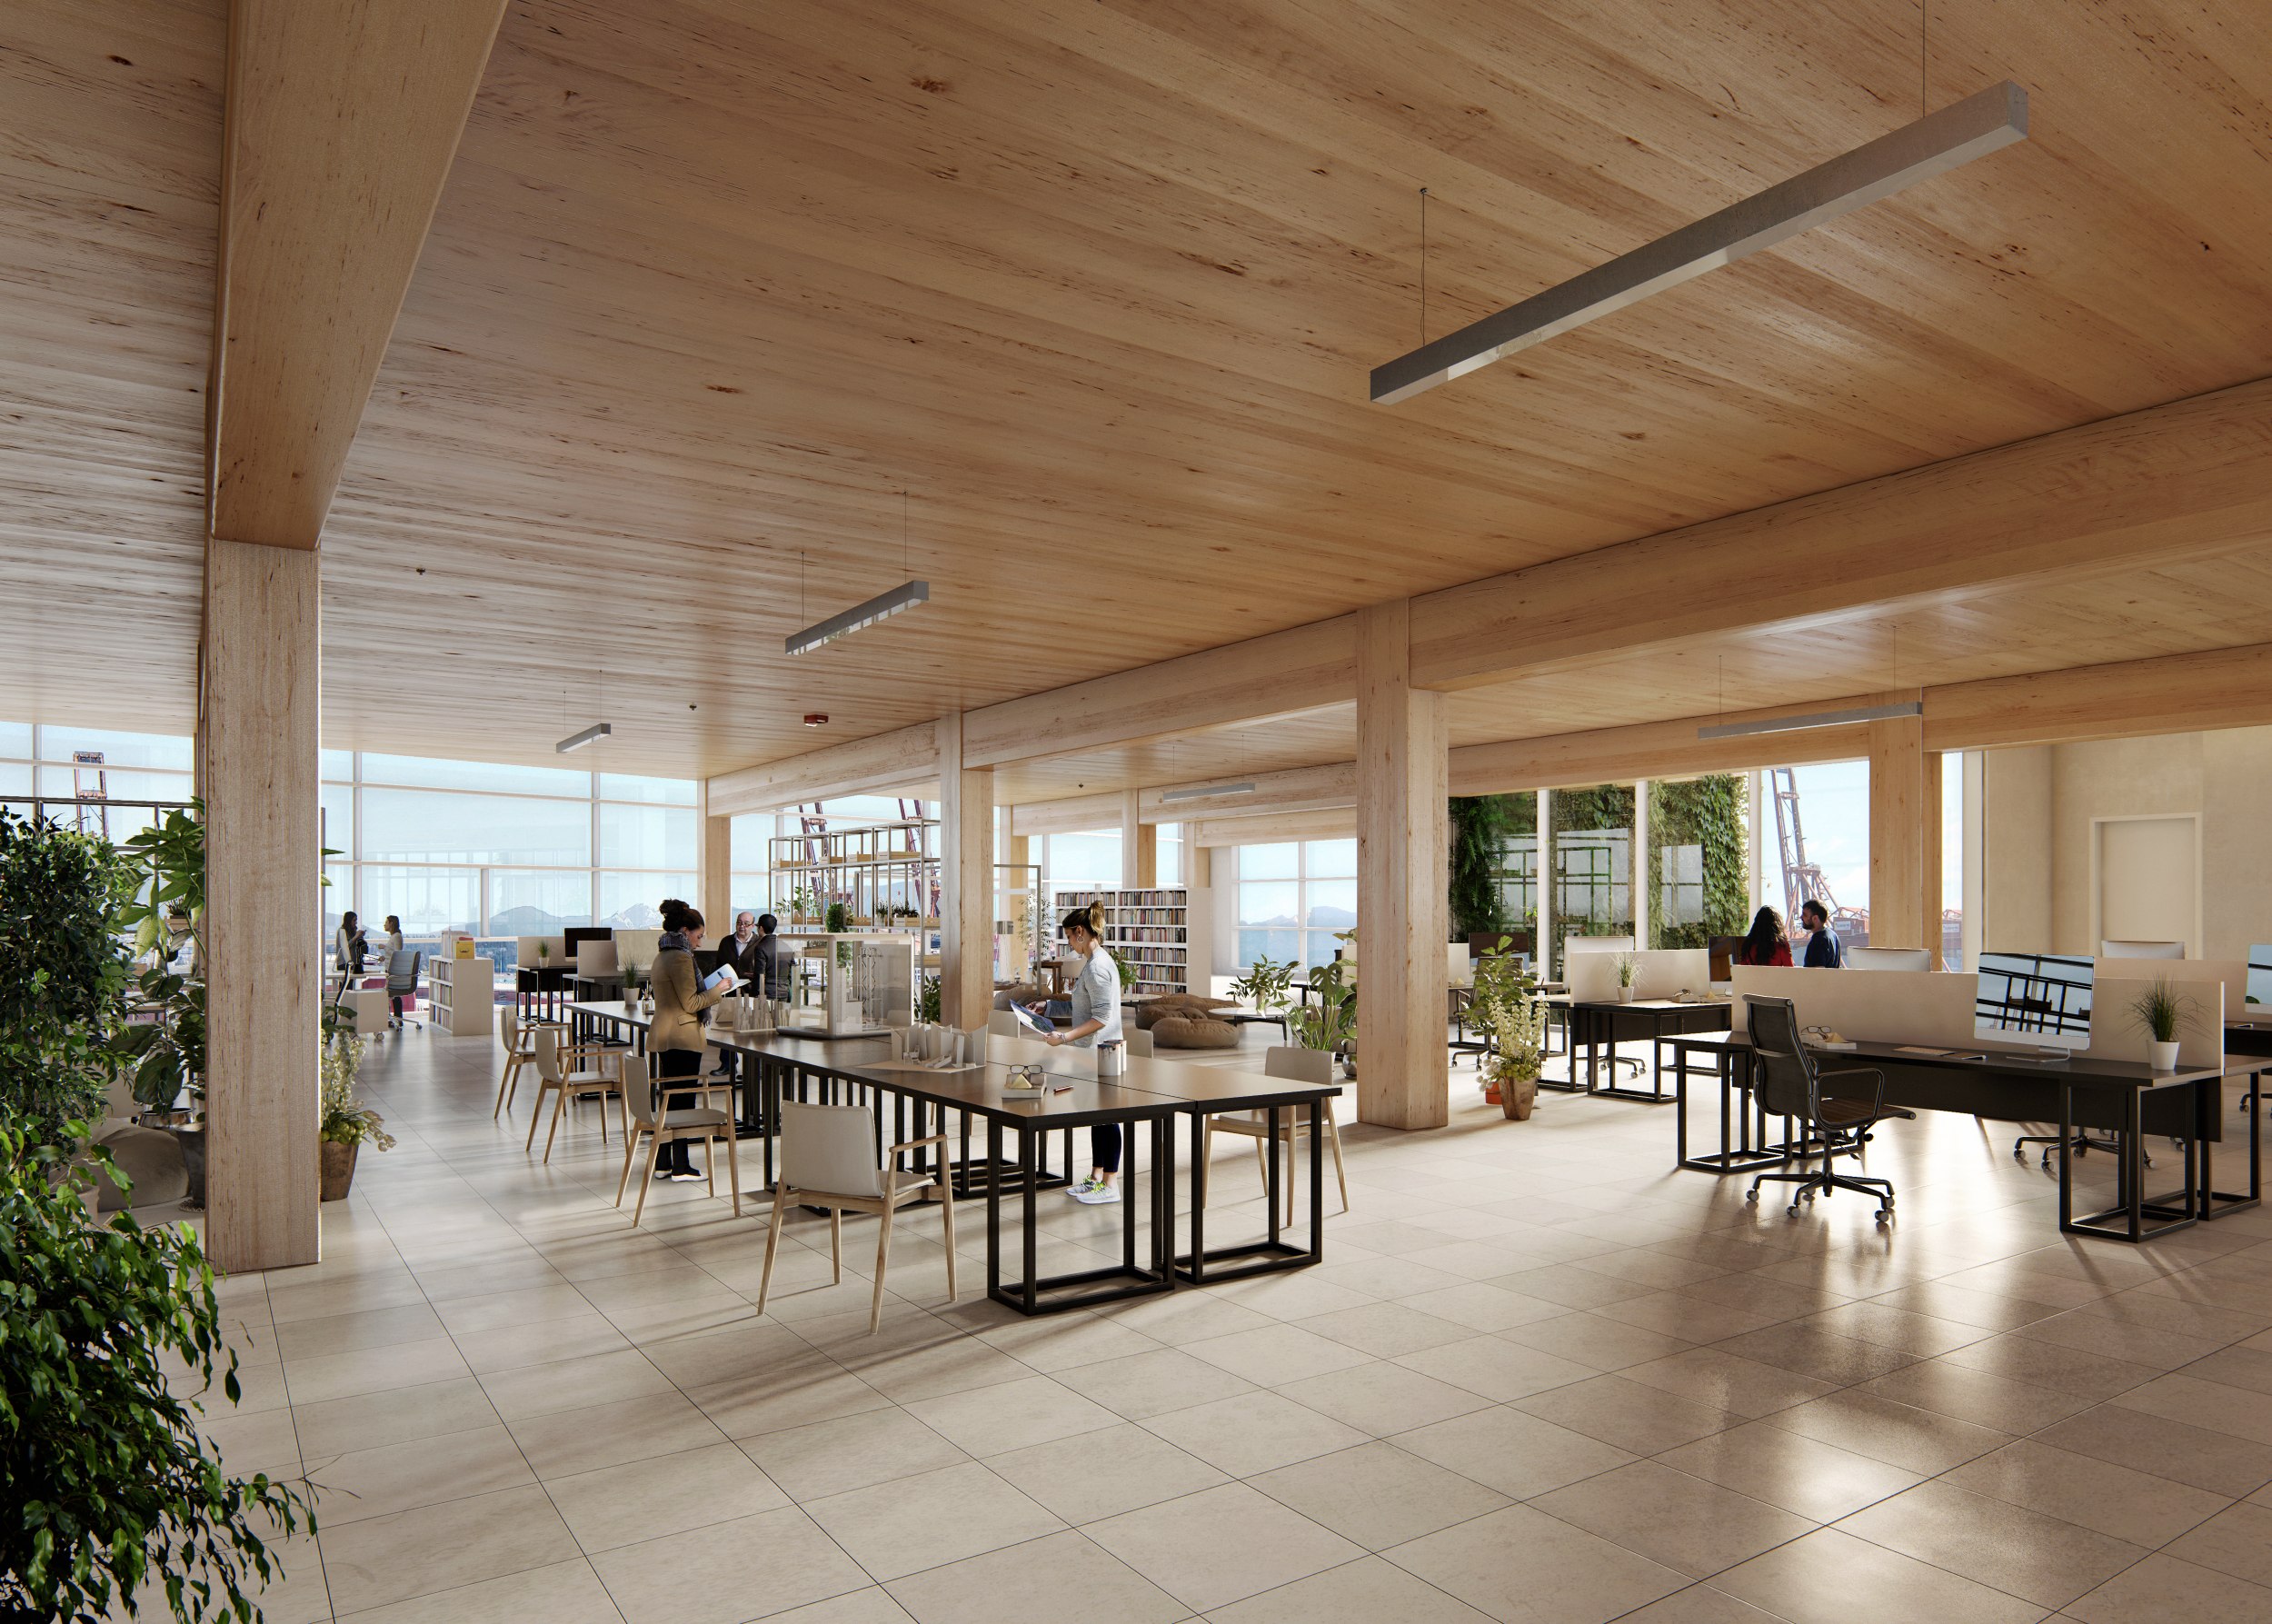 Rendering of people working in an open concept office environment. The office has a wood ceiling and wood columns.